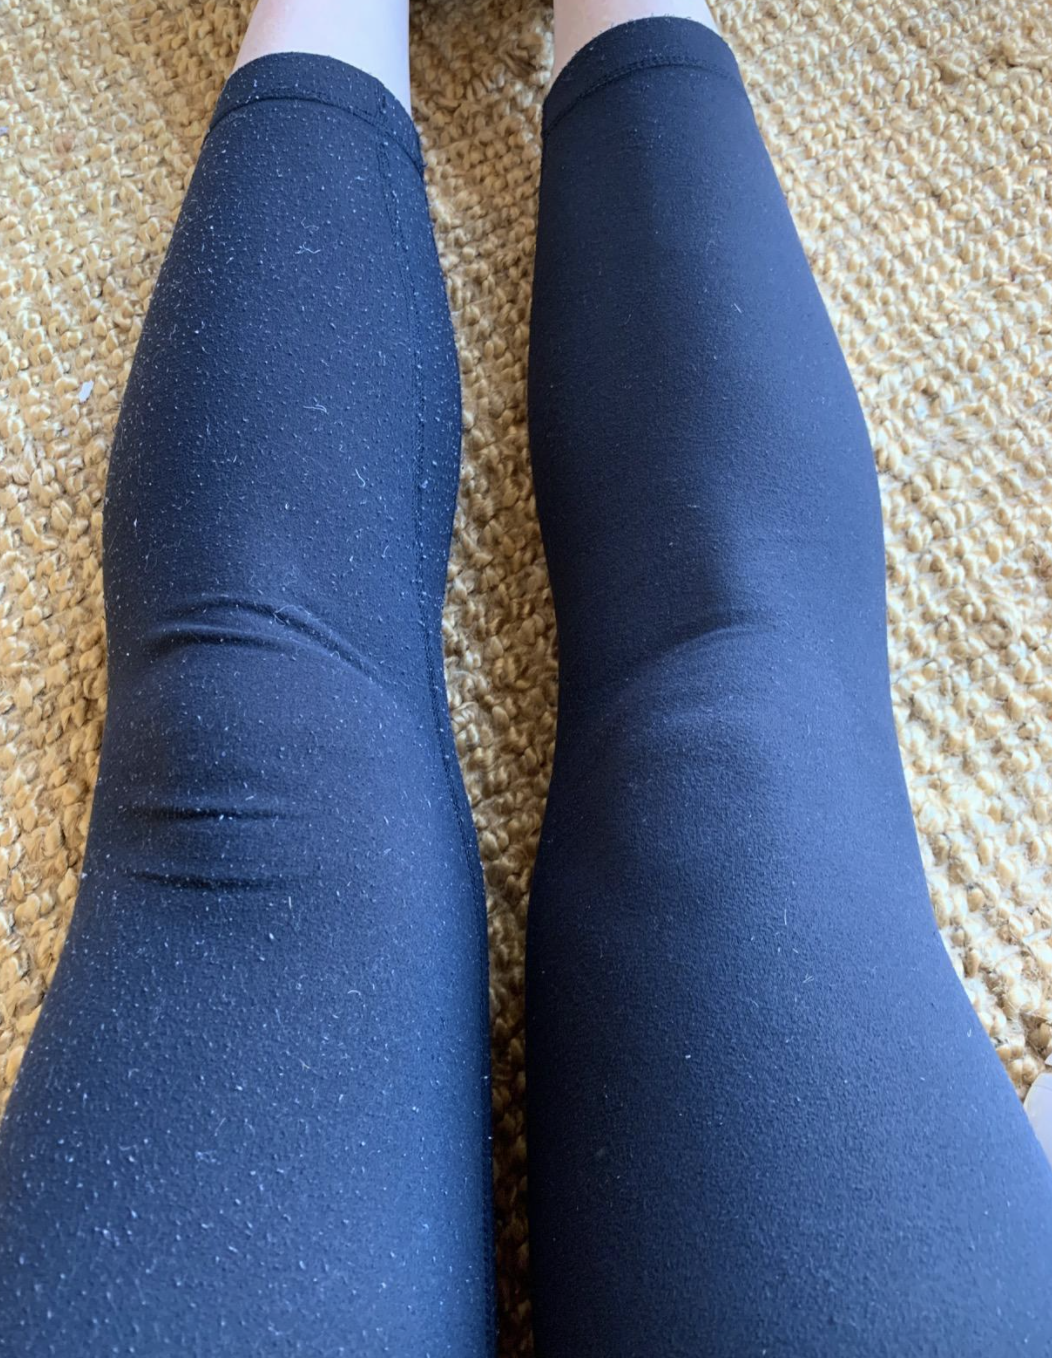 reviewer wearing blue leggings with visible pilling on the left leg and no pilling on the right